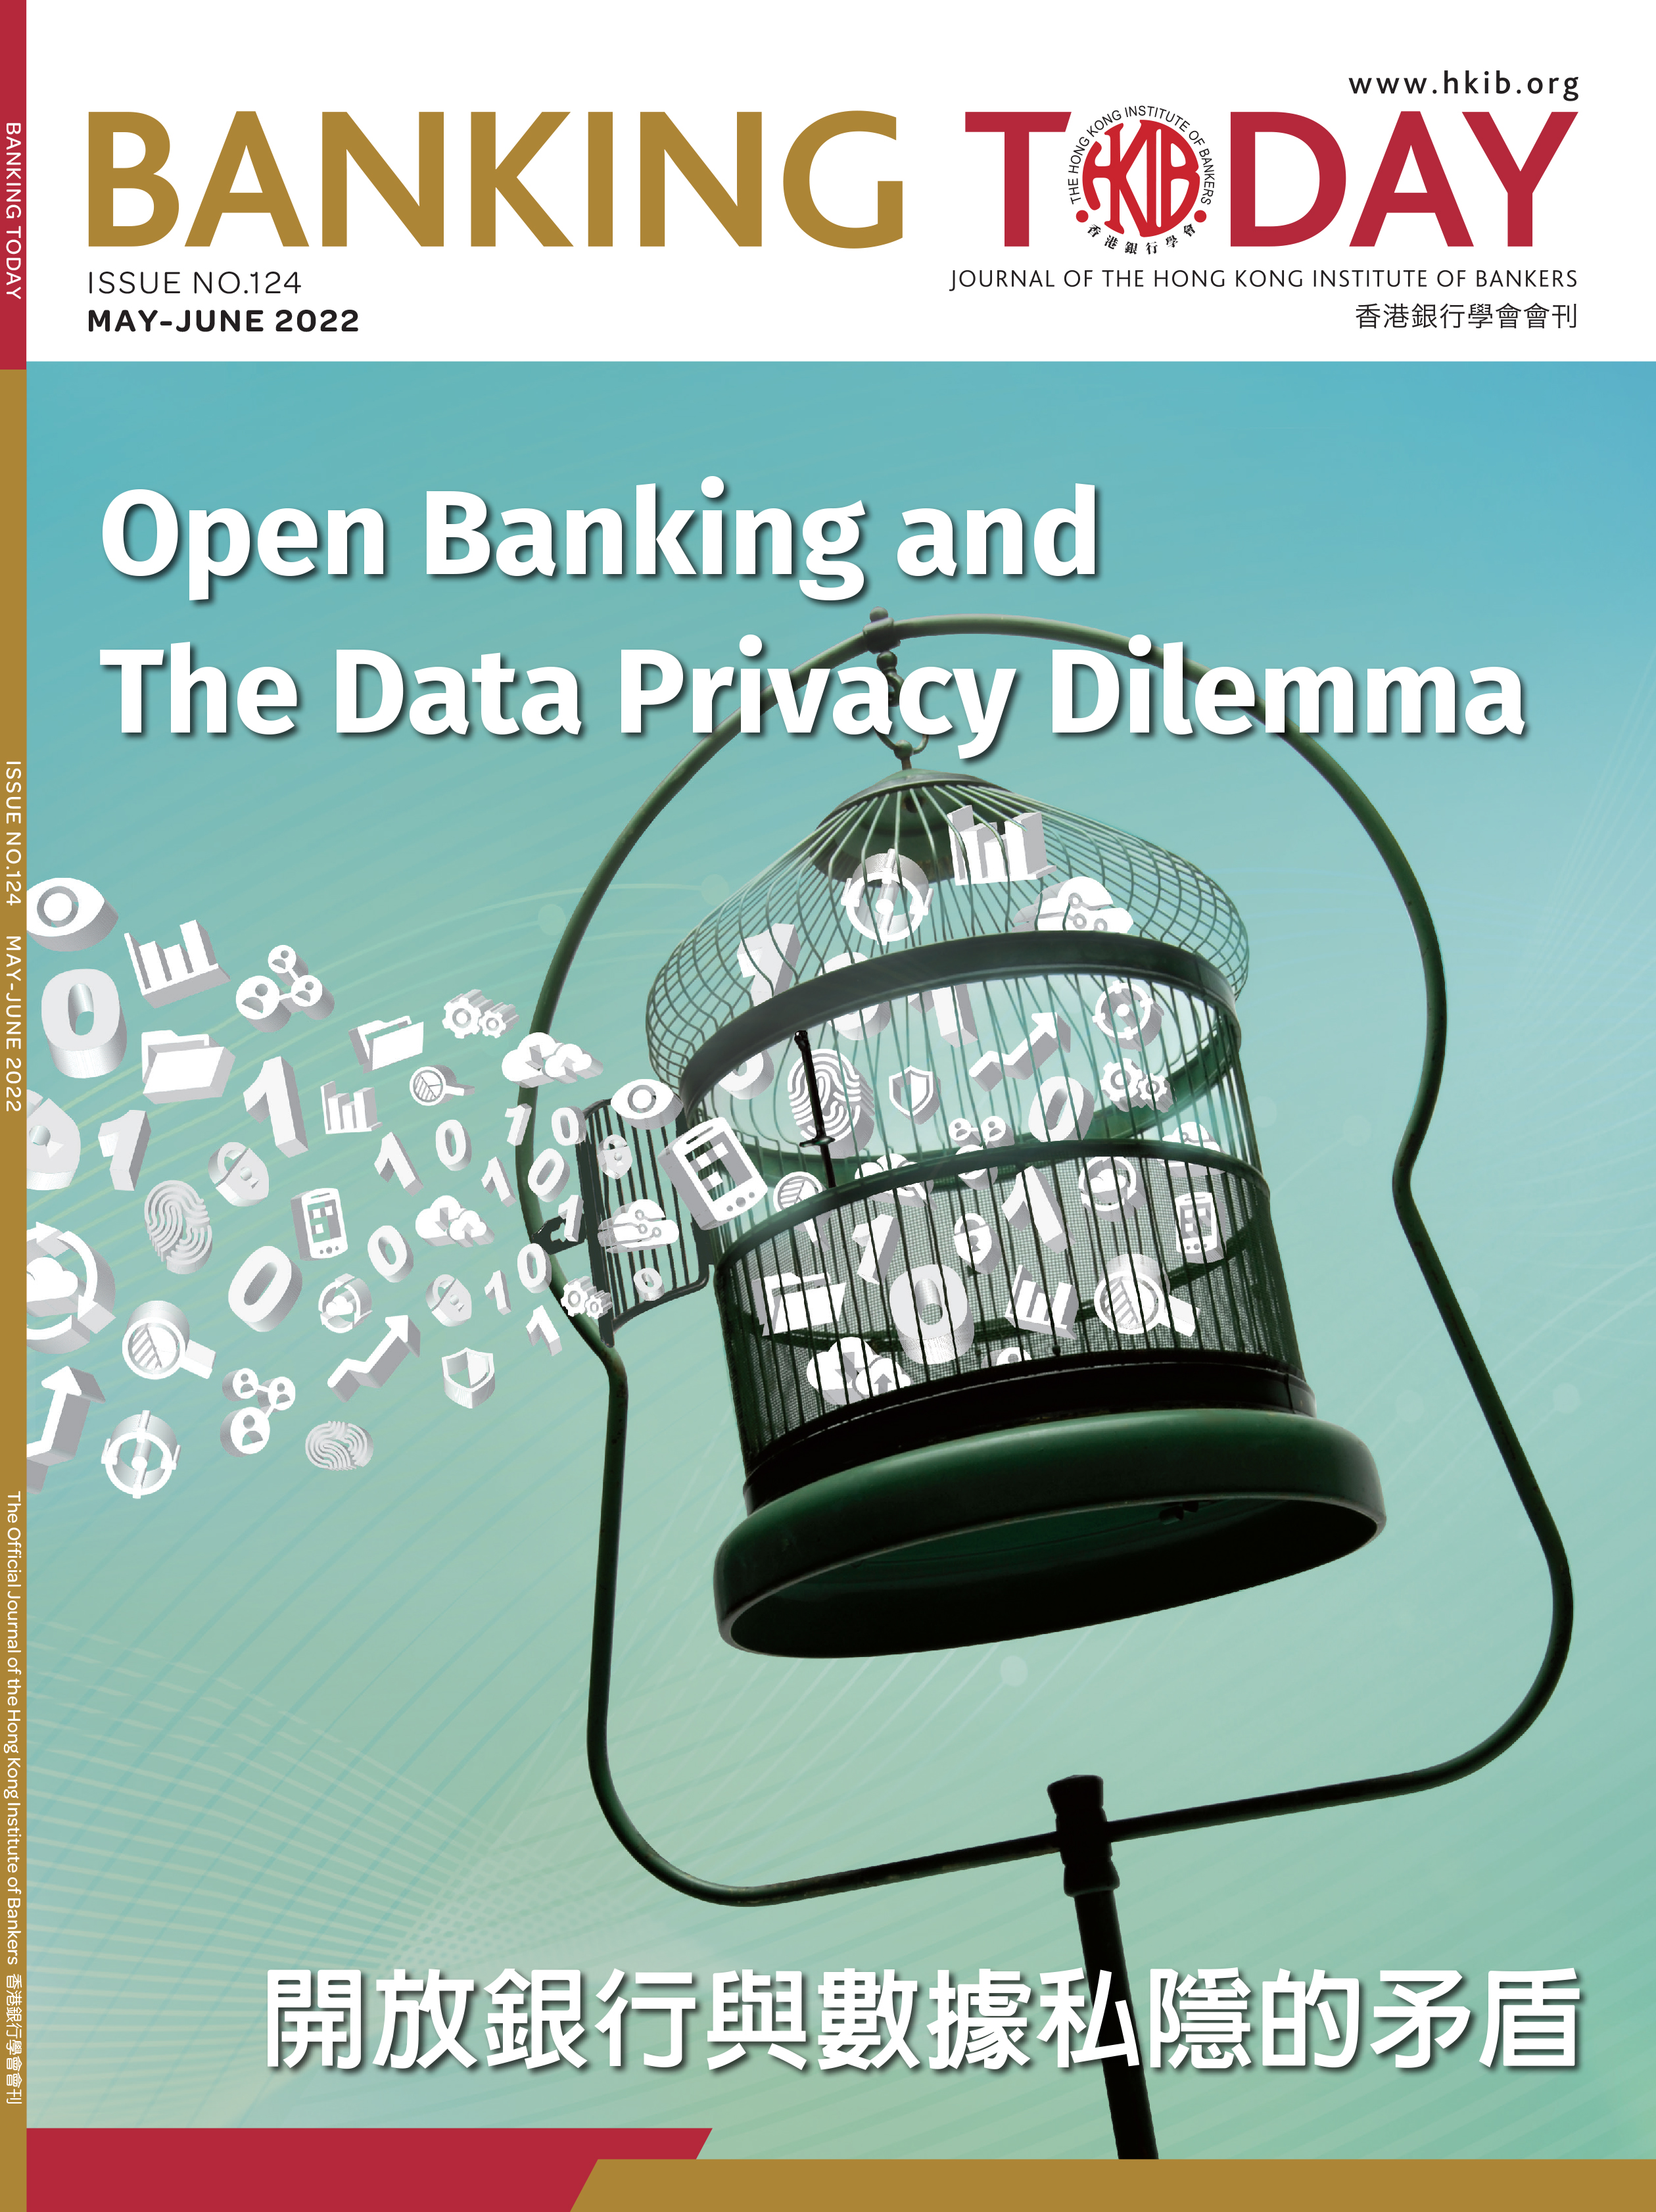 Open Banking and the Data Privacy Dilemma